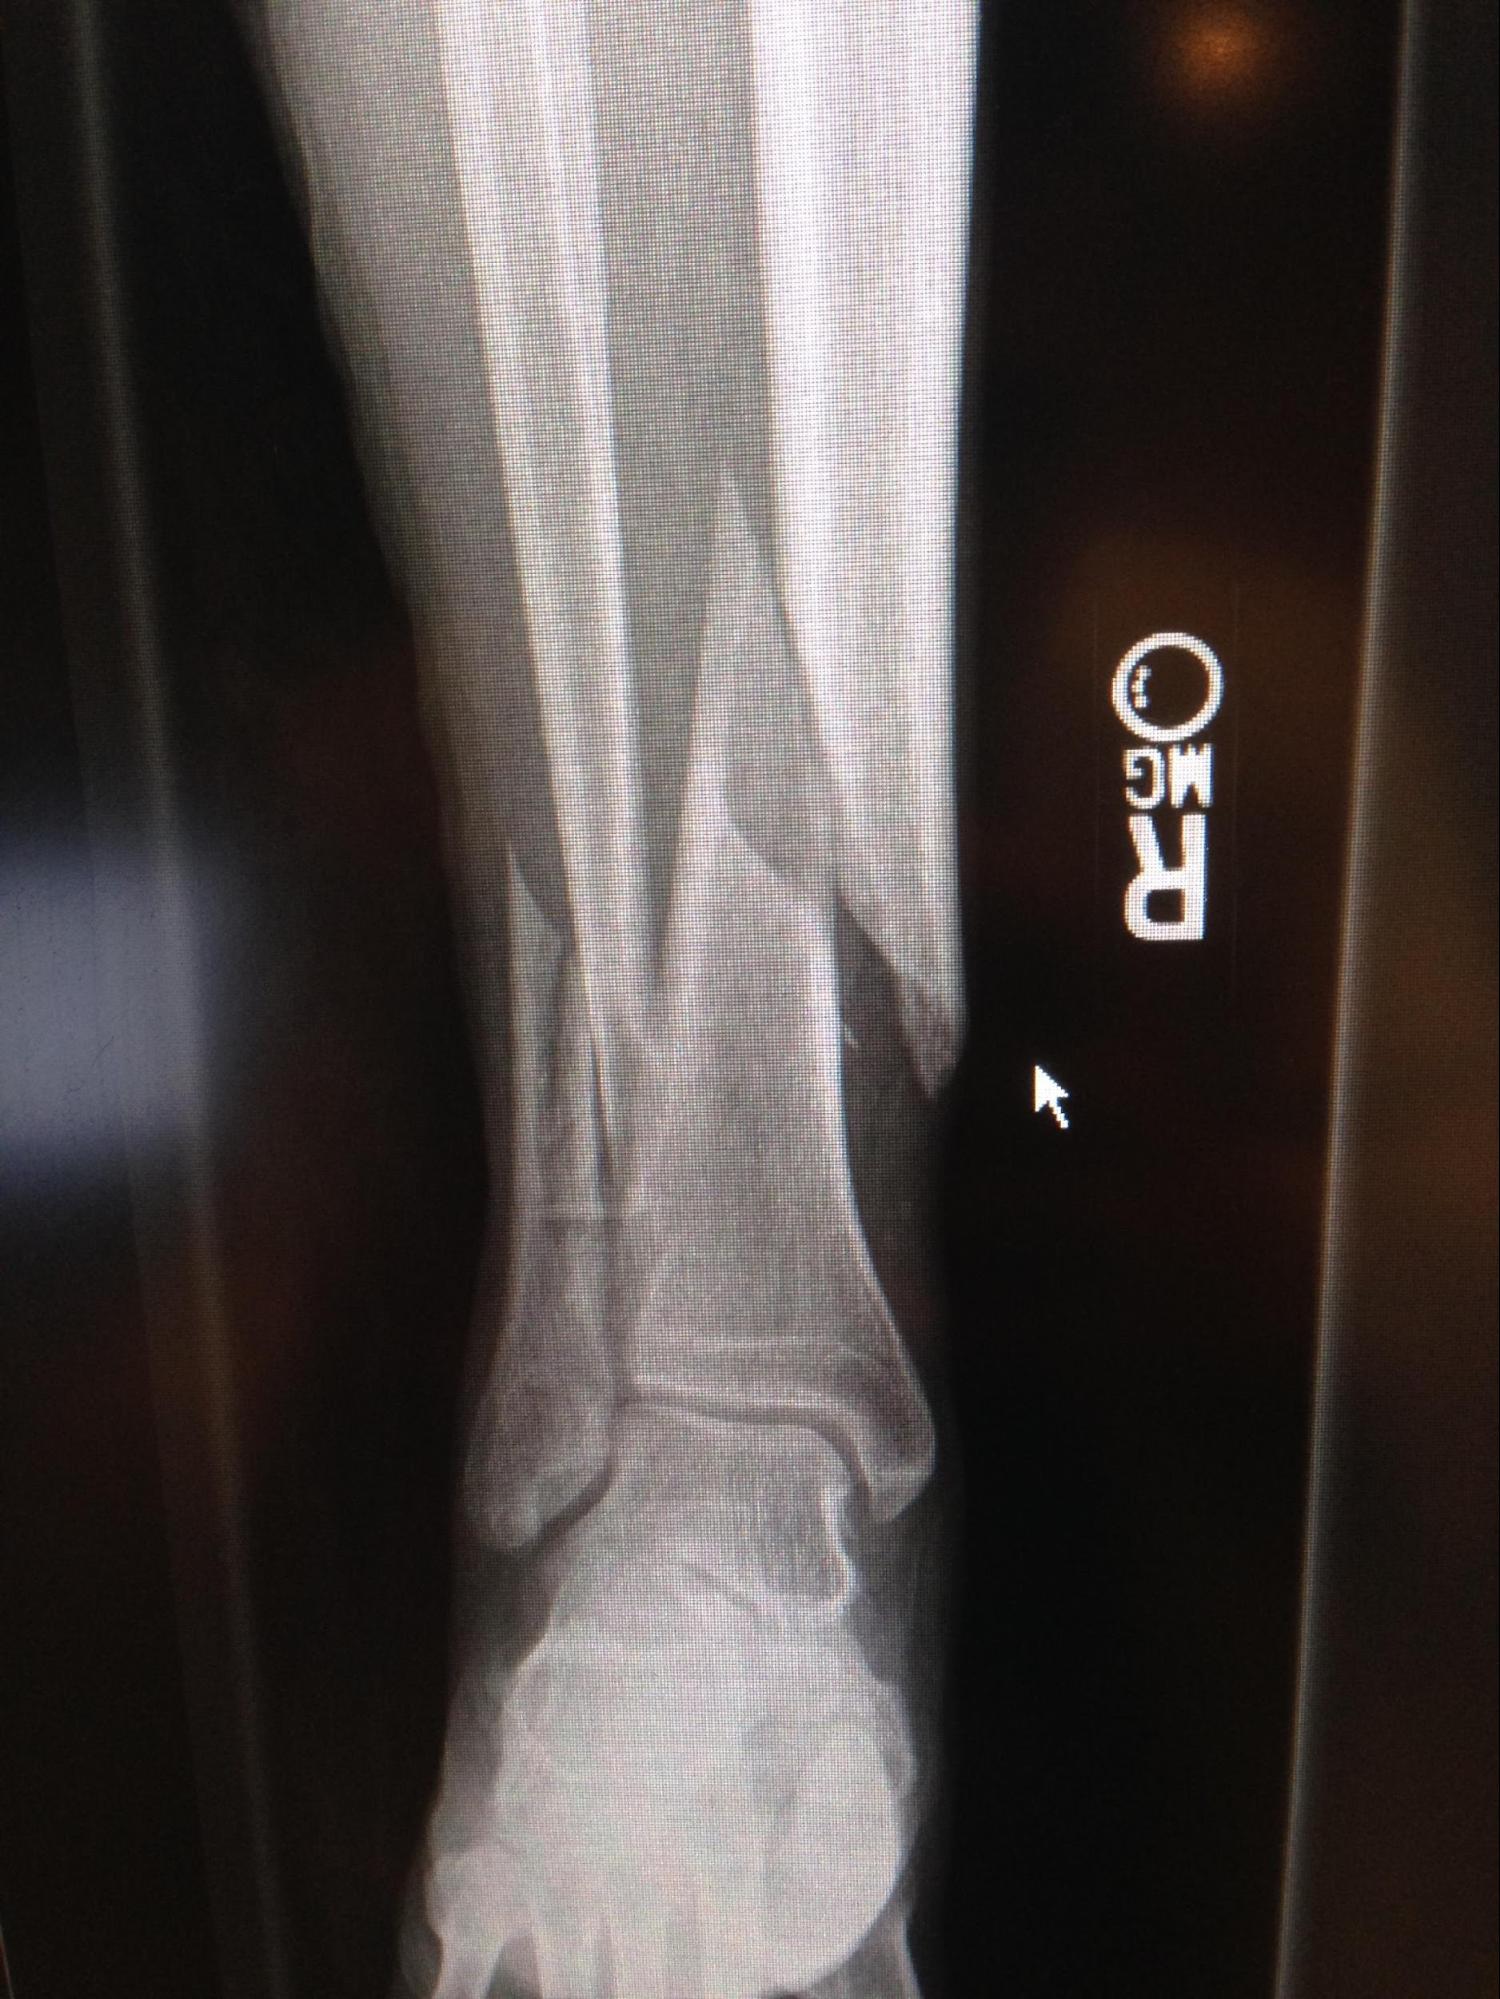 Tibial Fracture
Spiral fracture of the distal one-third tibia and fibula. 